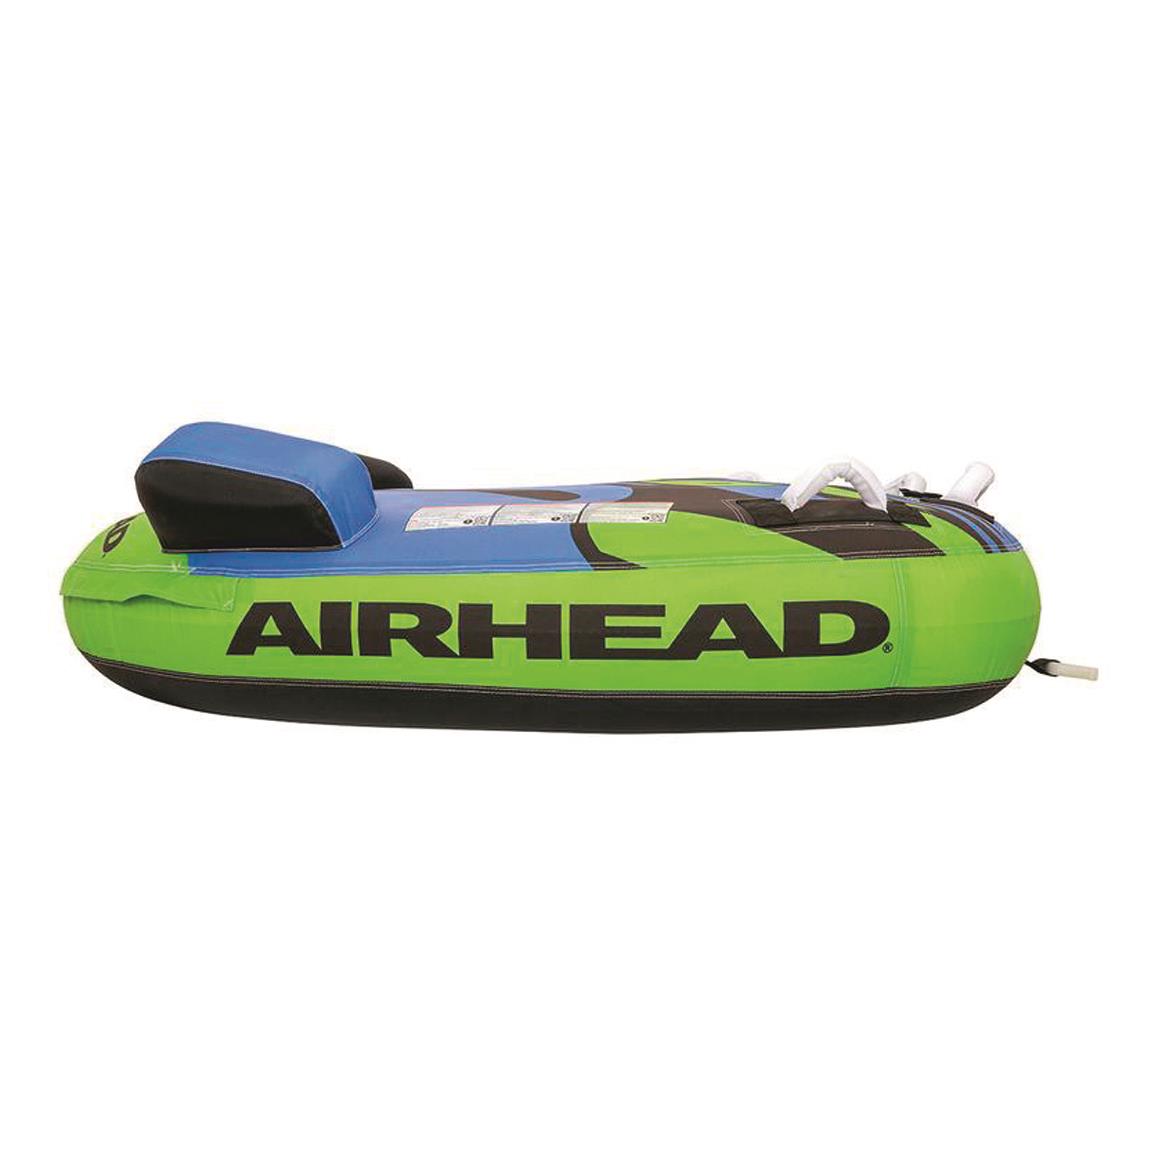 Airhead Mach 2-rider Towable Tube - 296405, Tubes & Towables at ...